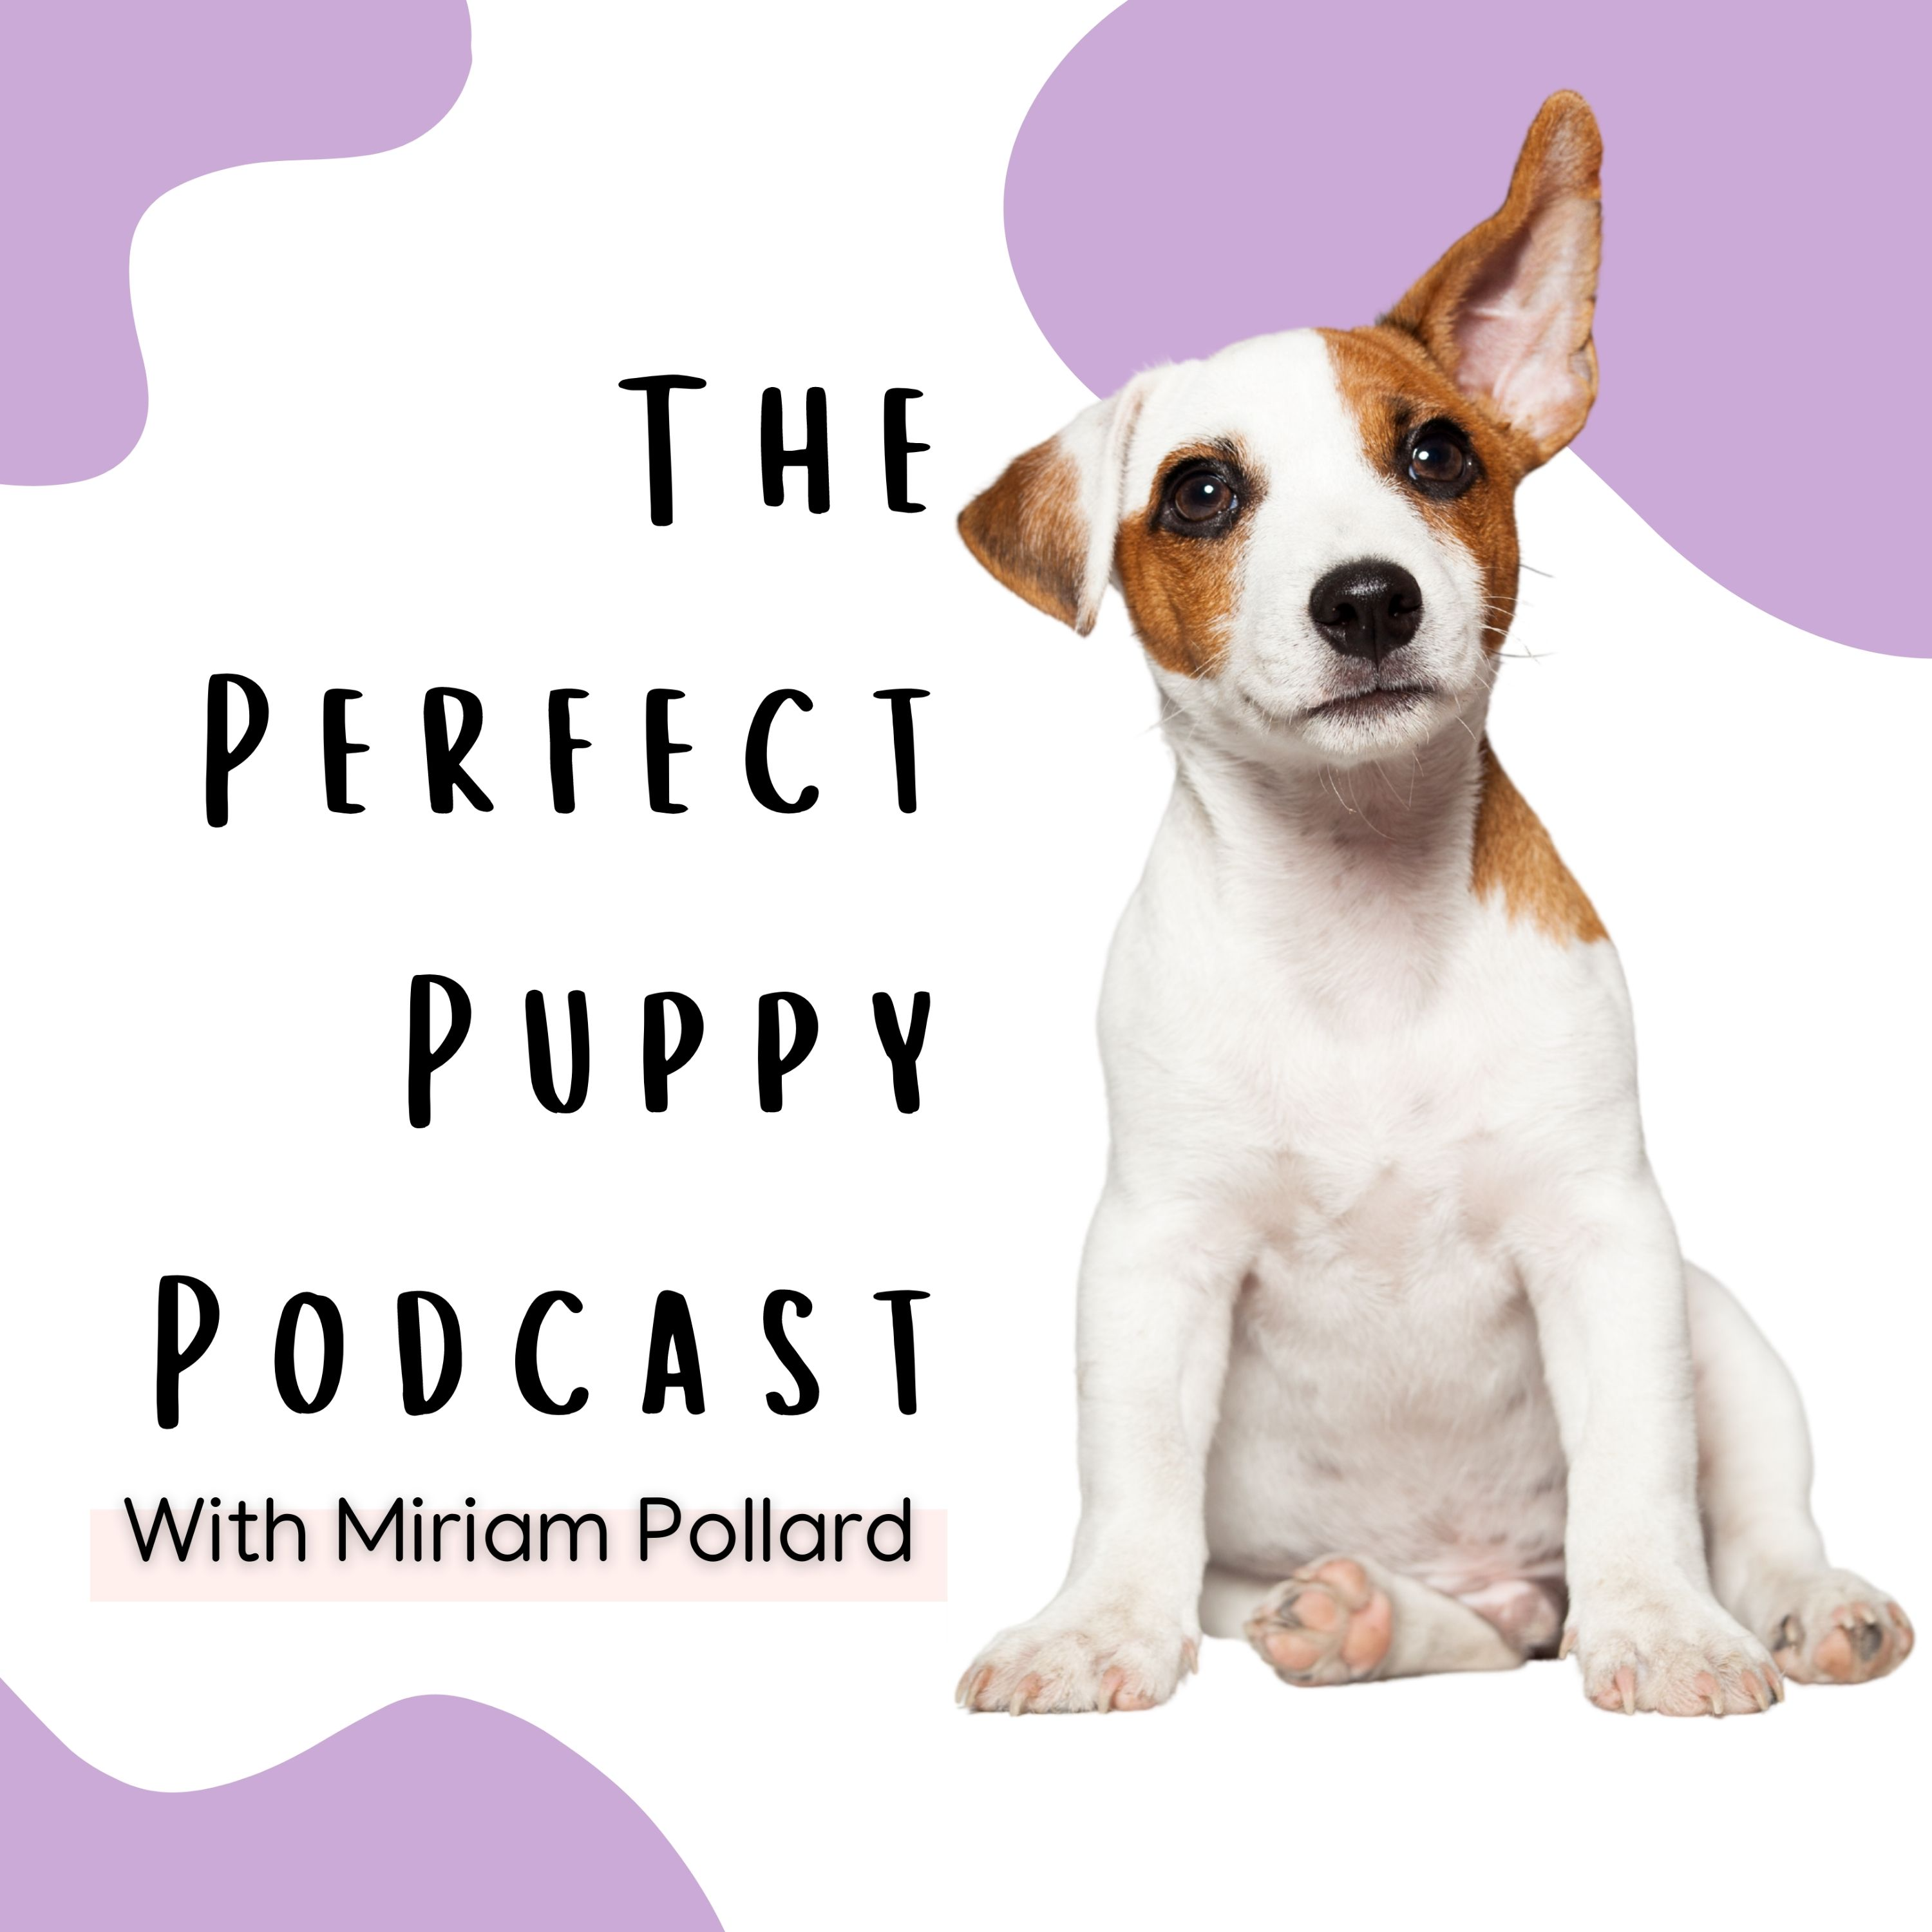 The Perfect Puppy Podcast